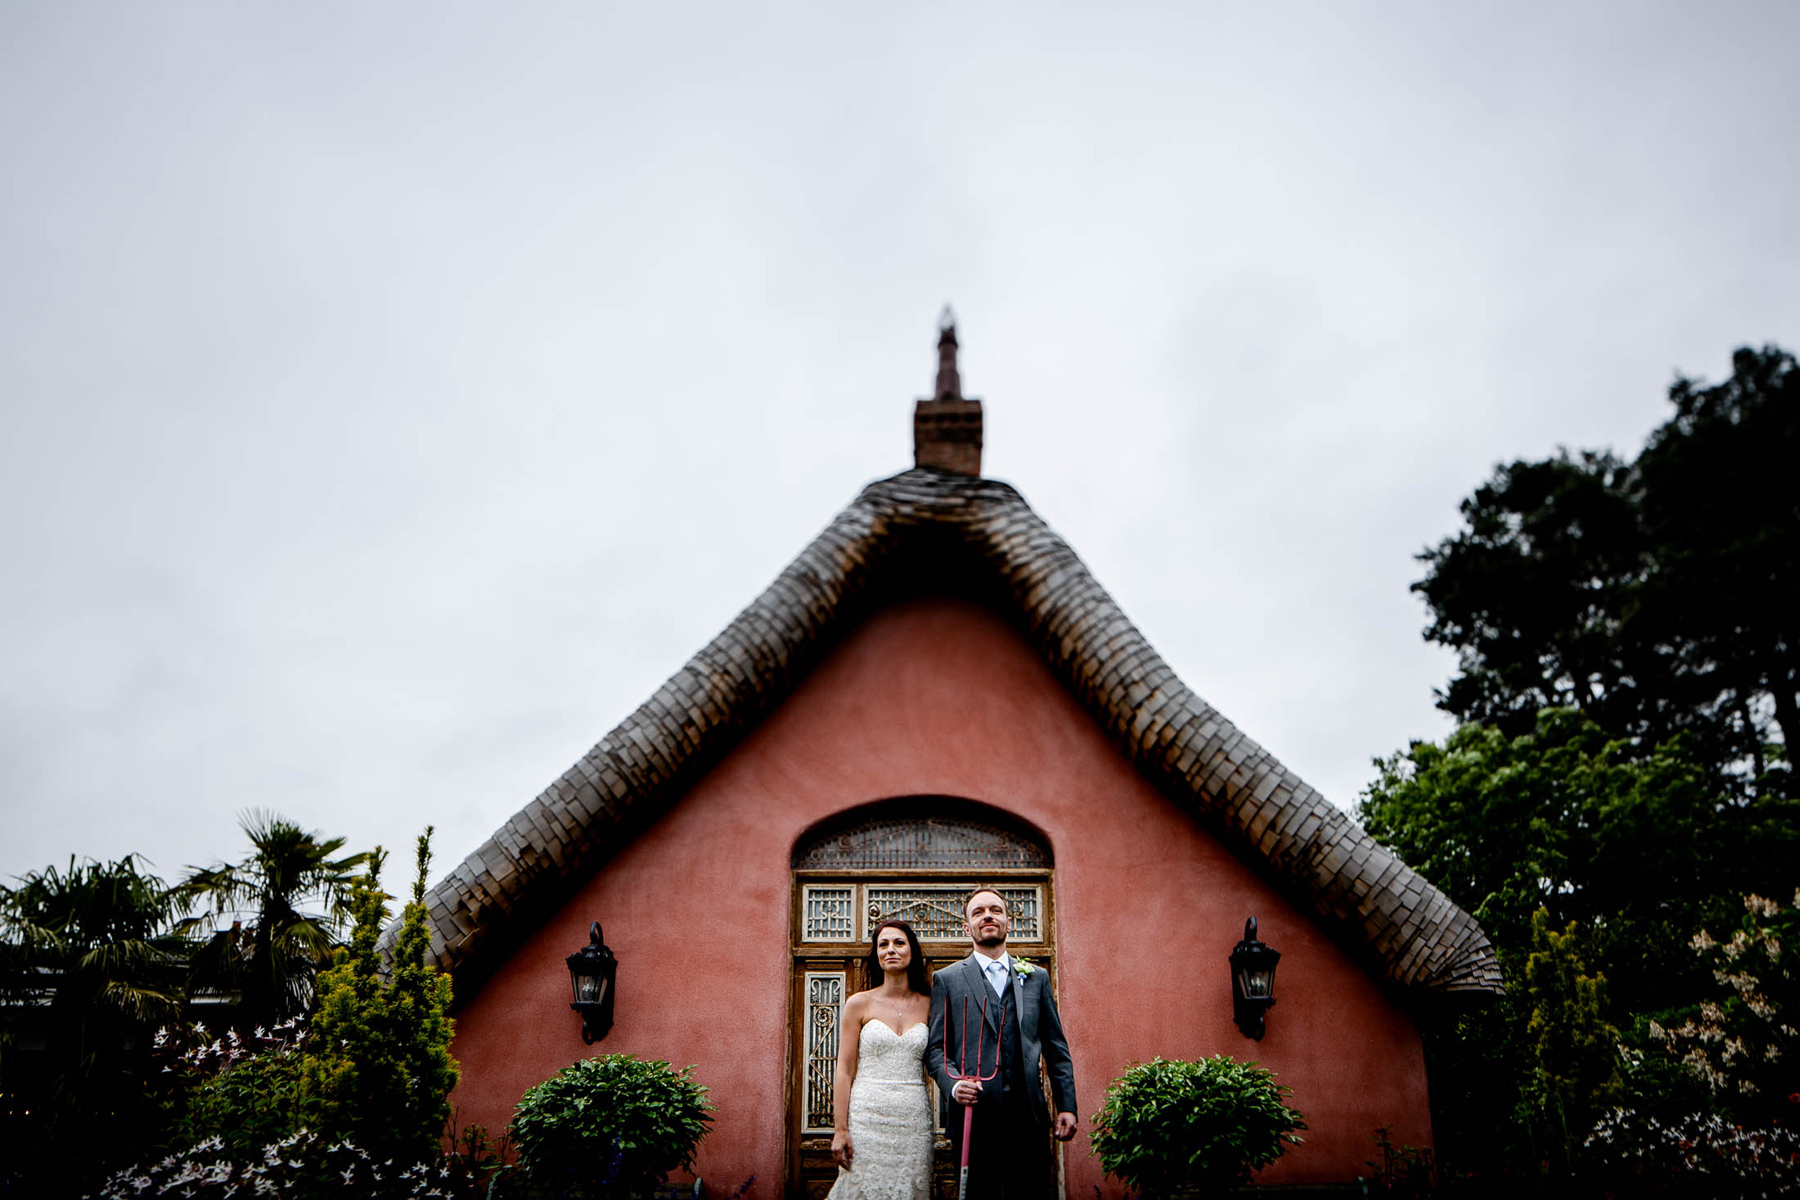 Grant woods American gothic as a wedding photograph at le petit chateau wedding venue